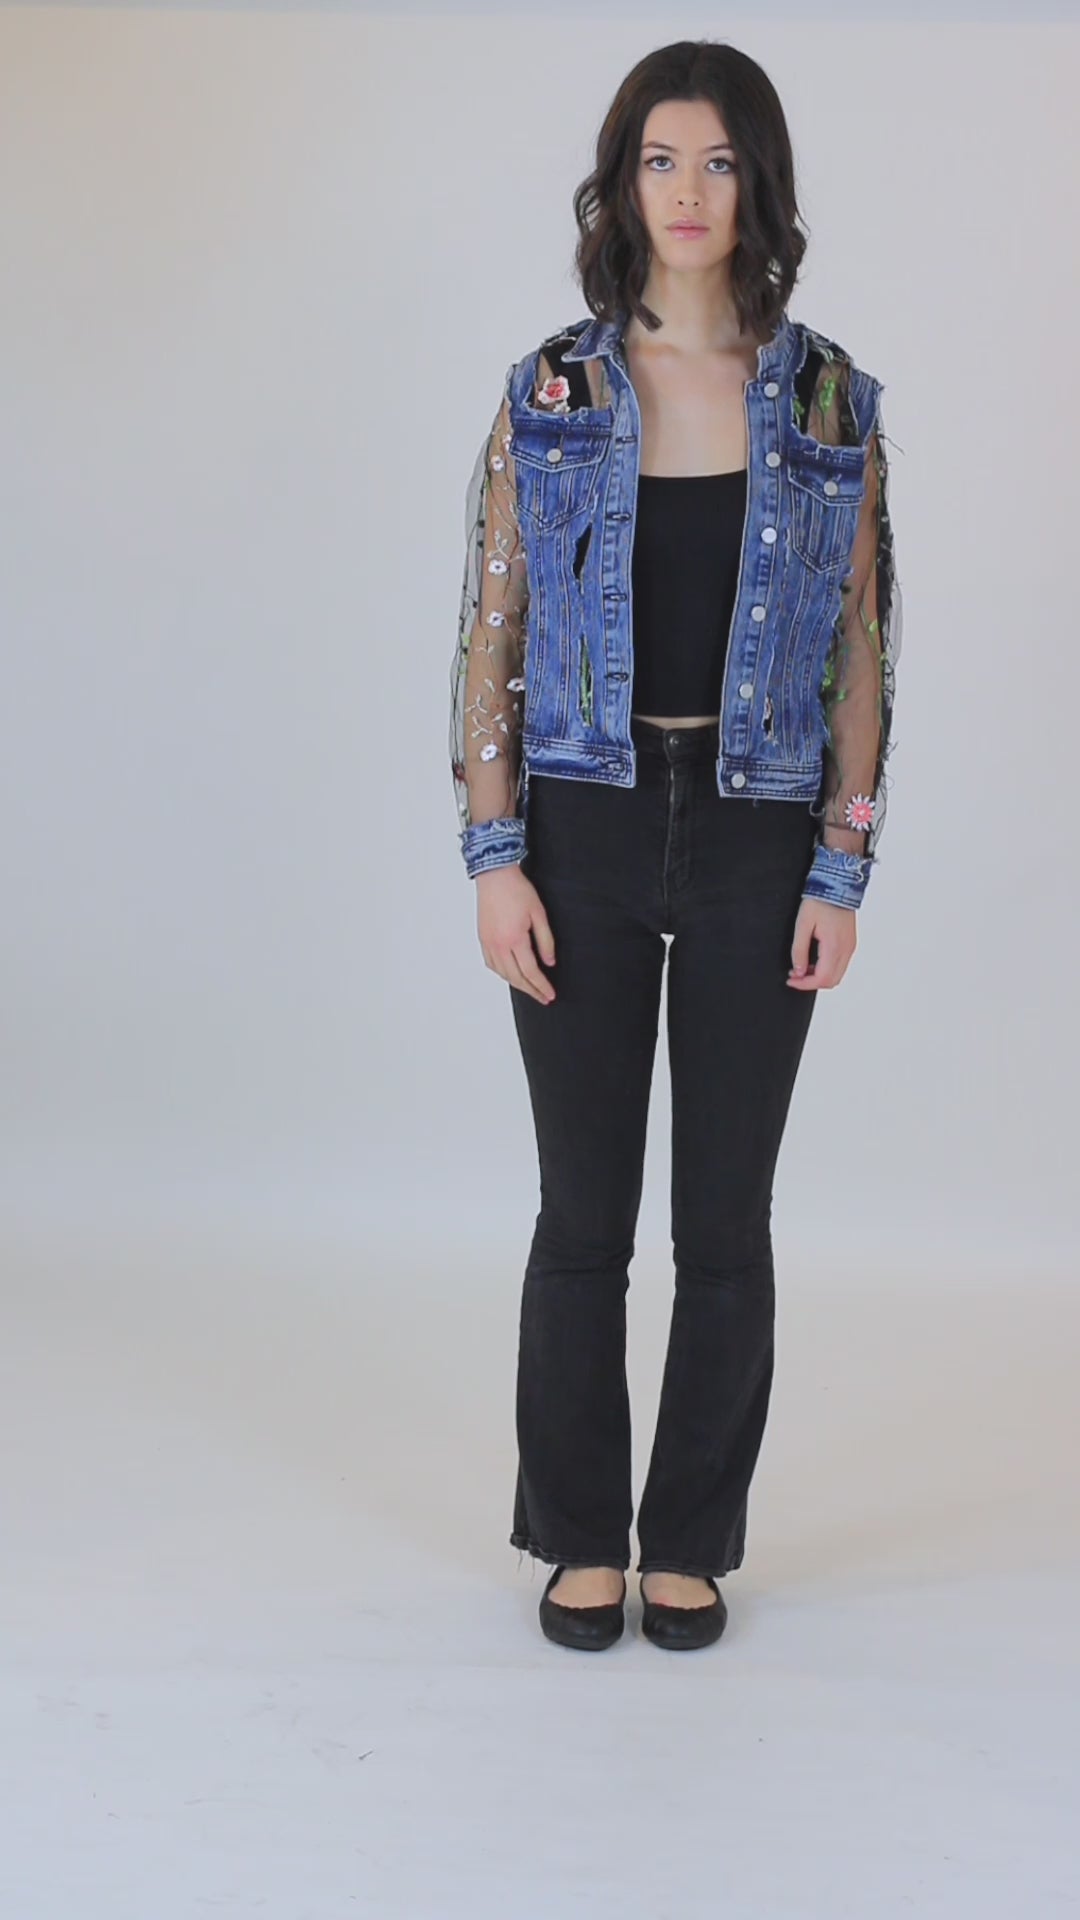 Vintage Denim Jacket with Stylish Floral Embroidery Detailing